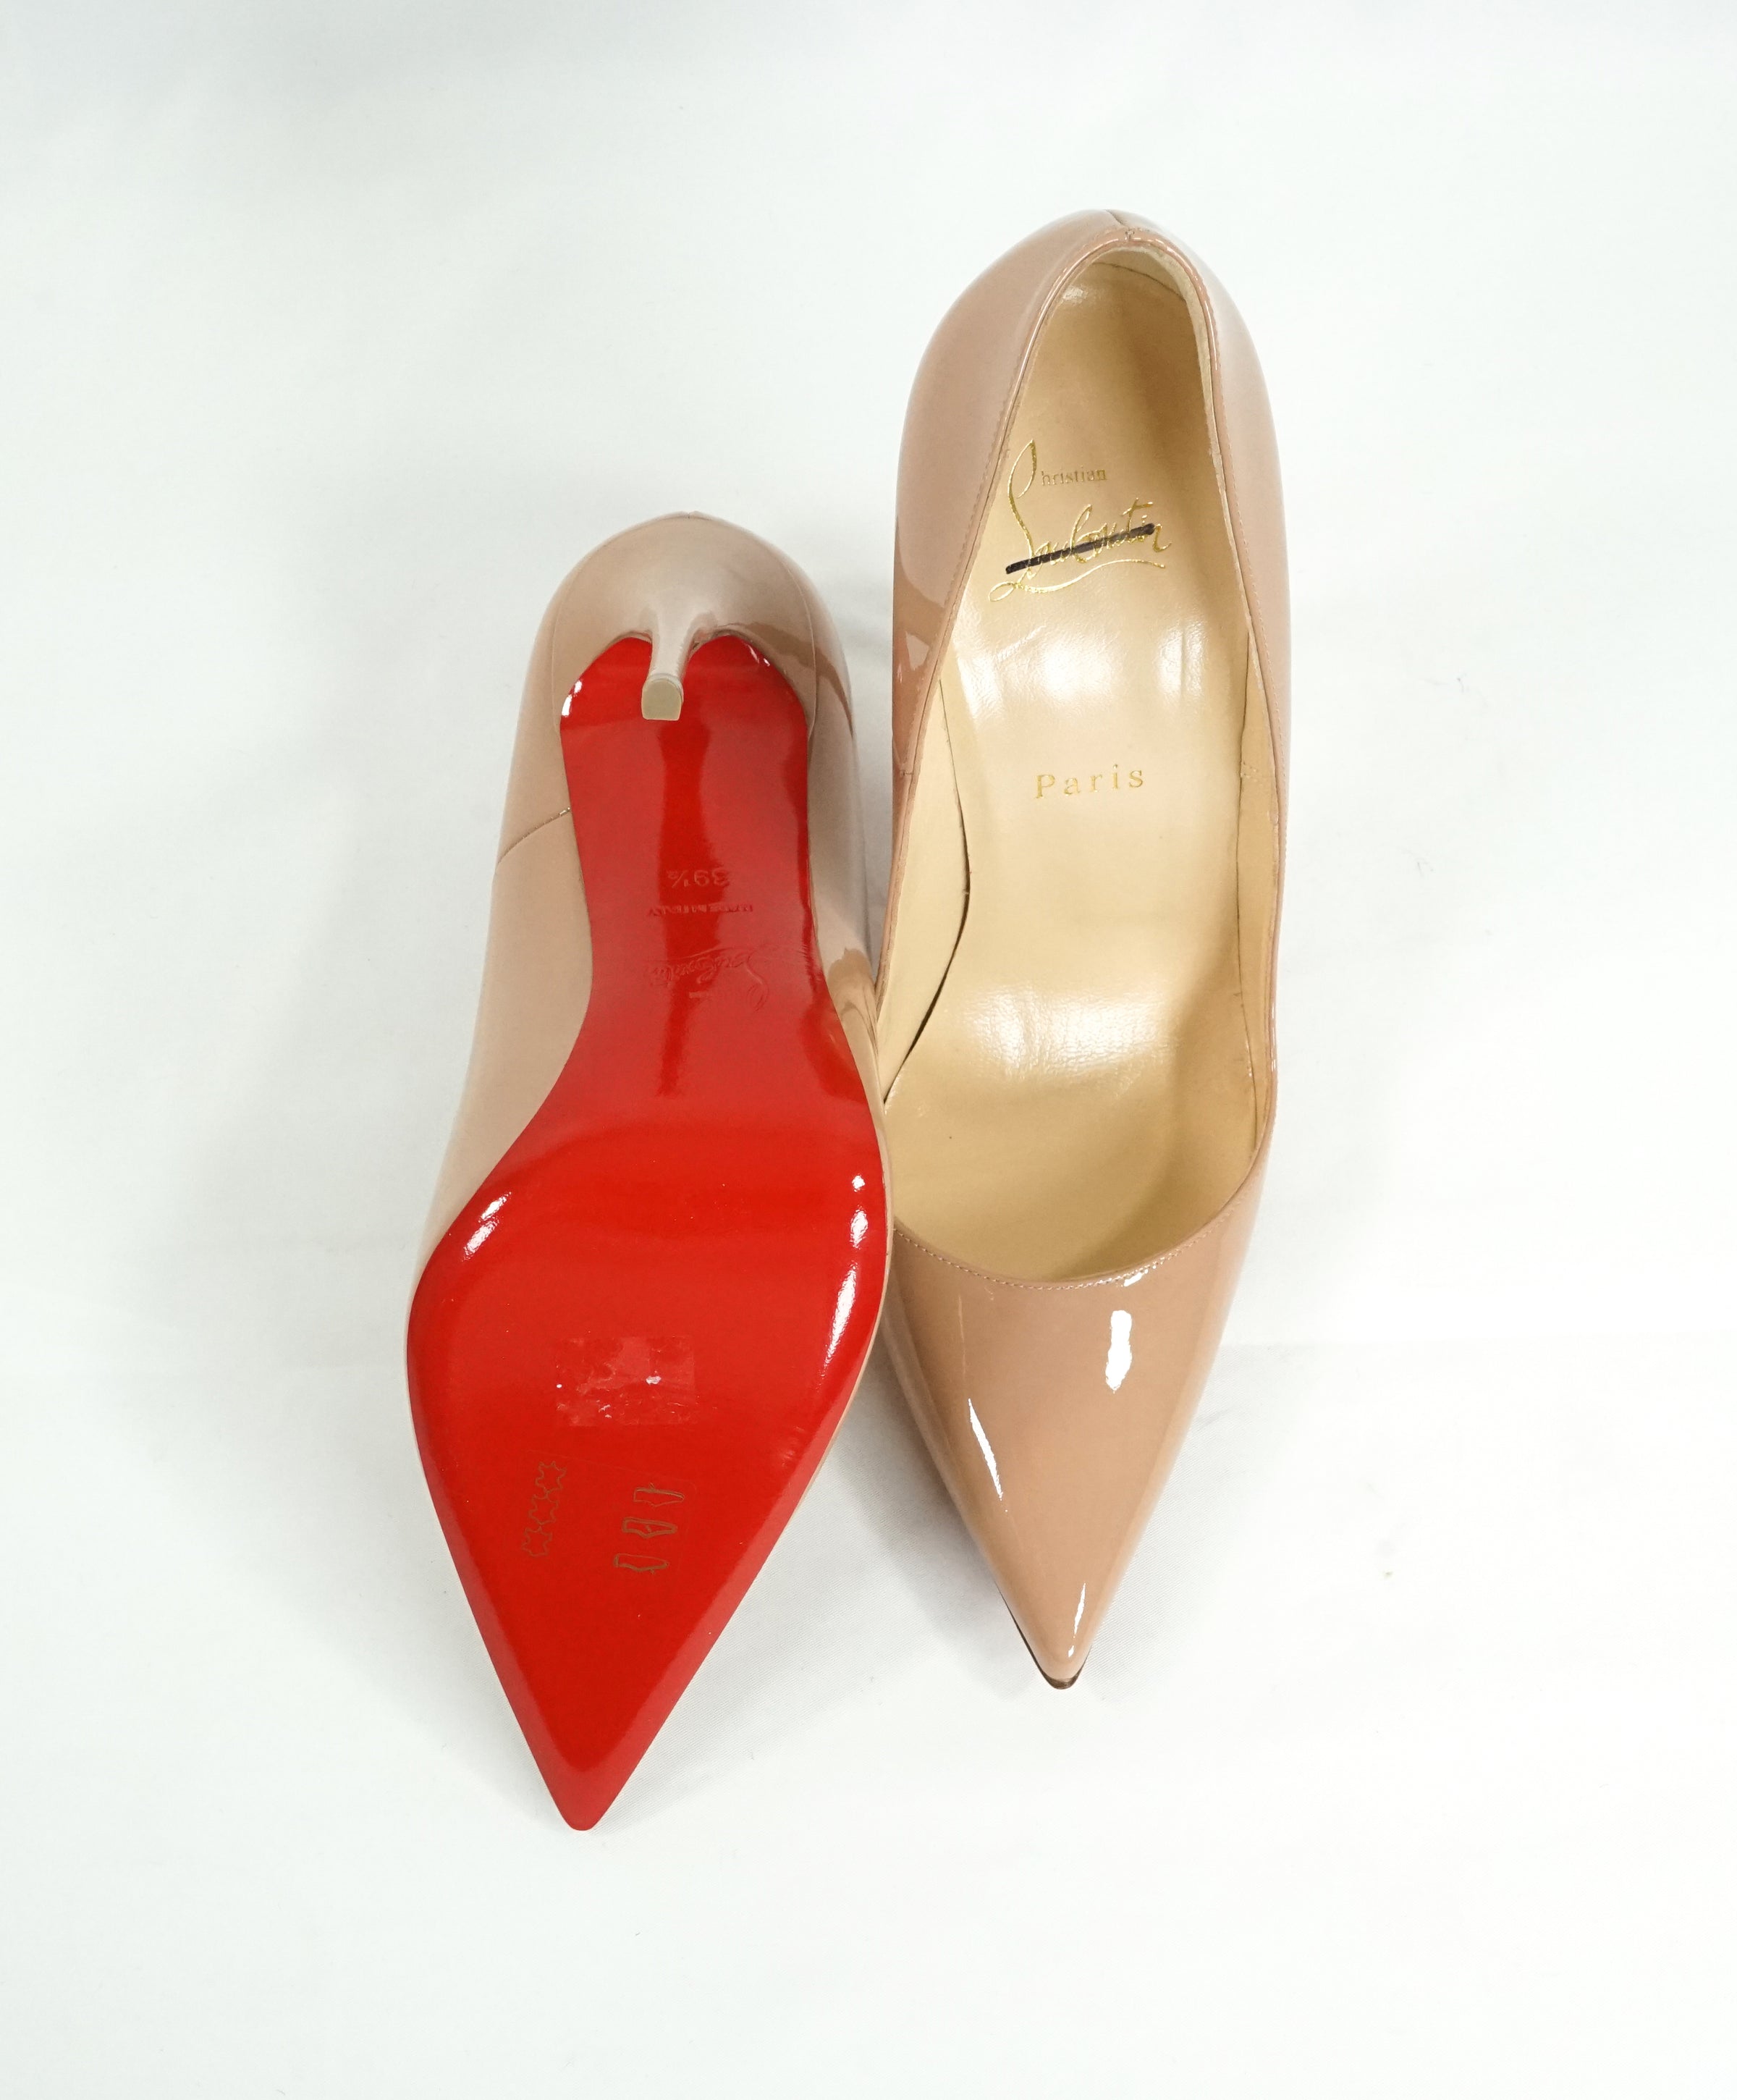 $795 CHRISTIAN LOUBOUTIN SO KATE 120 CRINKLED LEATHER GOLD HEELS PUMPS SIZE  39